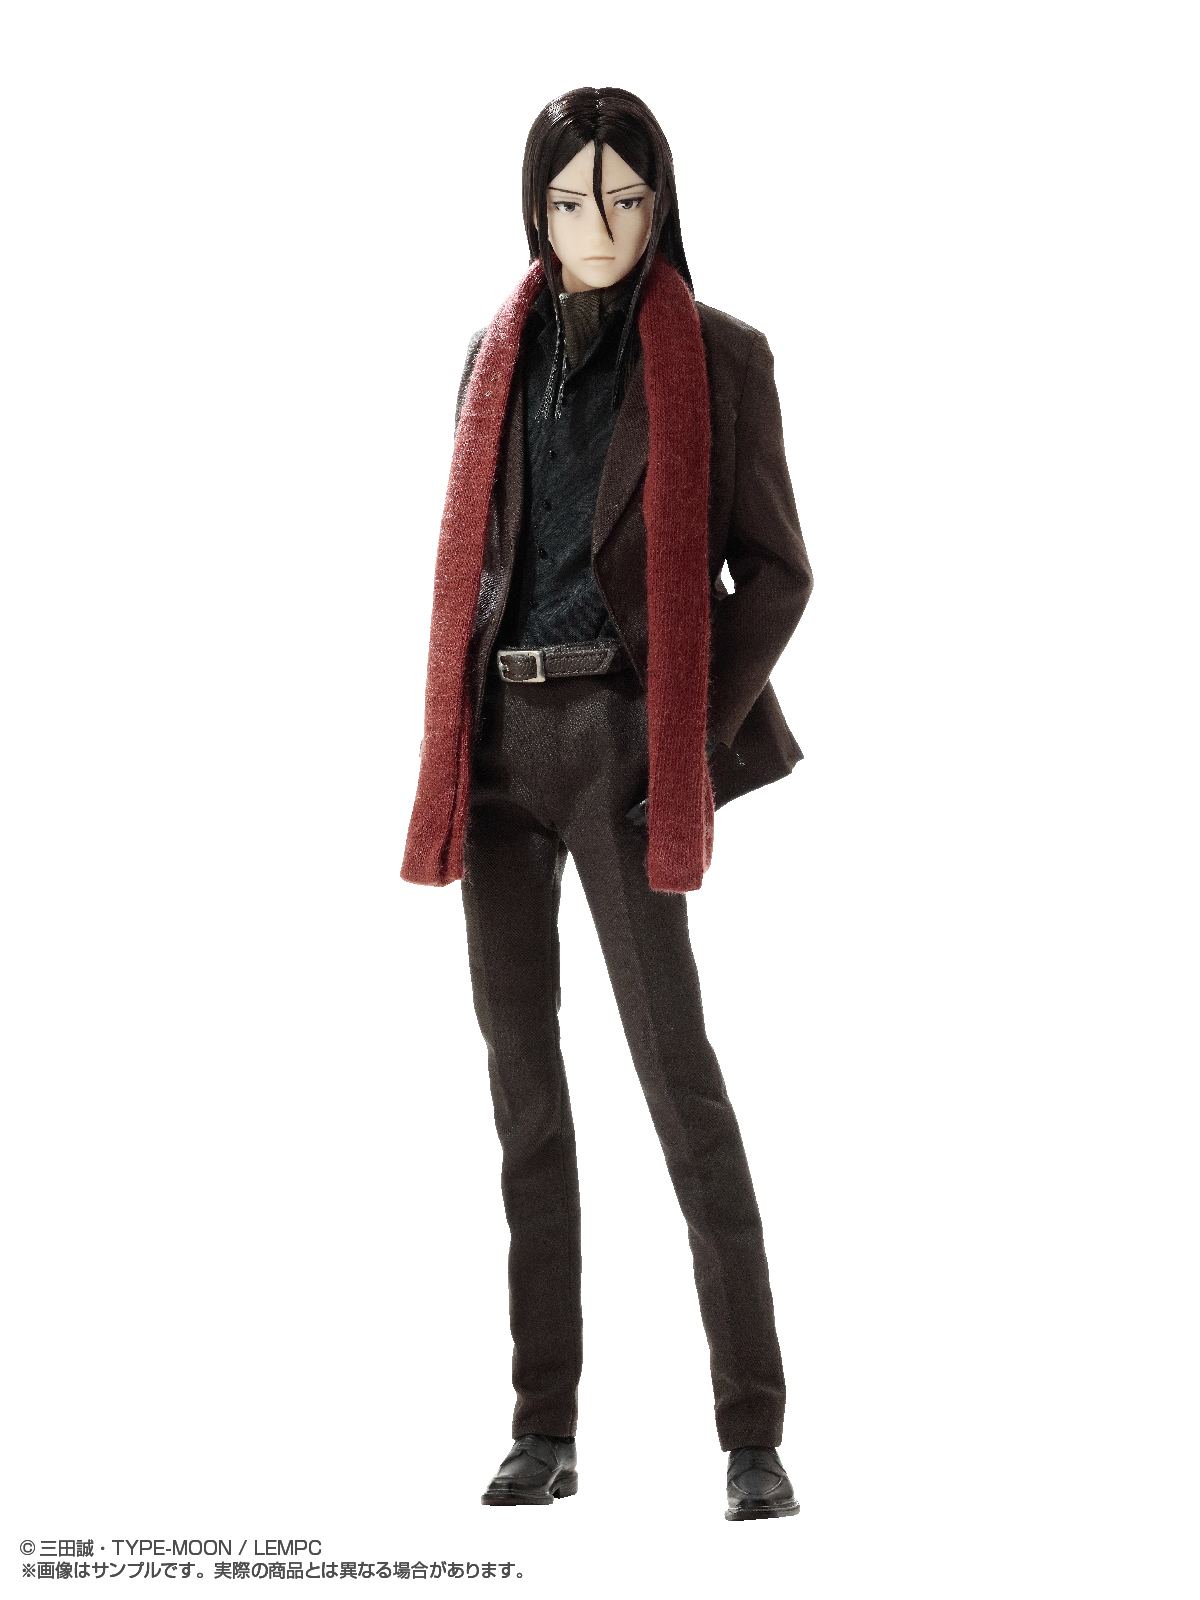 ASTERISK COLLECTION SERIES NO. 020 THE CASE FILES OF LORD EL-MELLOI II RAIL ZEPPELIN GRACE NOTE 1/6 SCALE FASHION DOLL: LORD EL-MELLOI II Azone